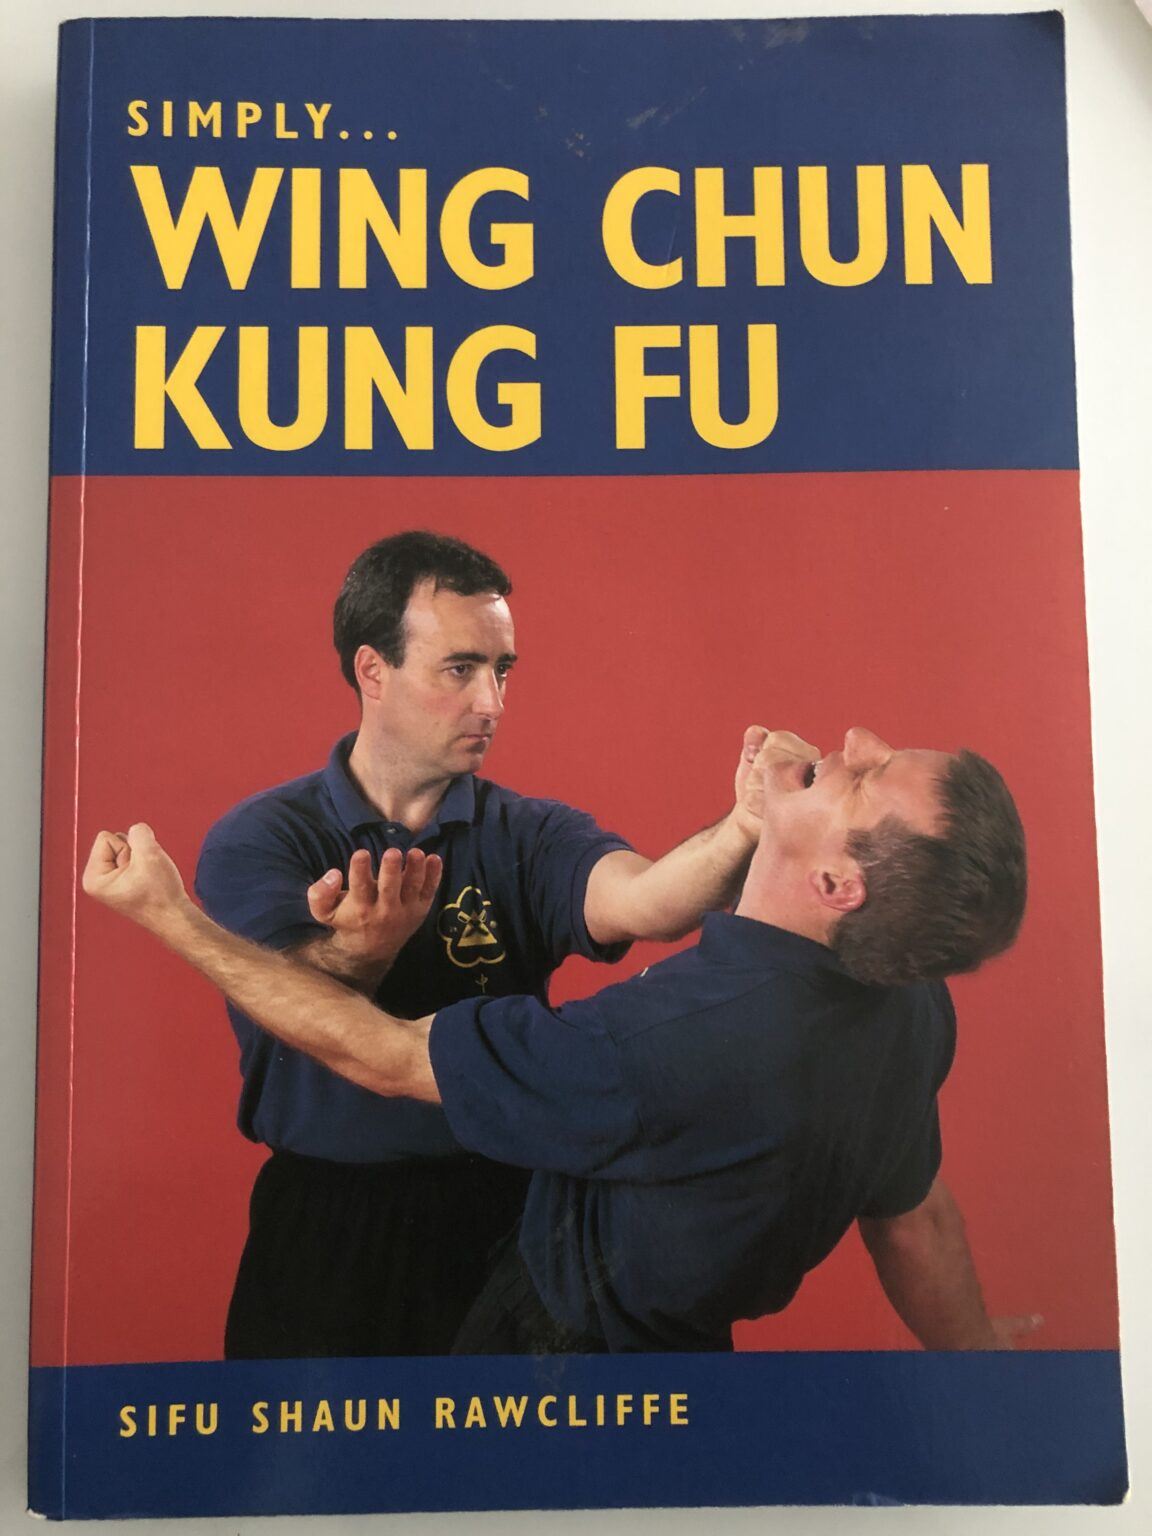 One of the best Martial Arts Training Books | Martial Arts Books